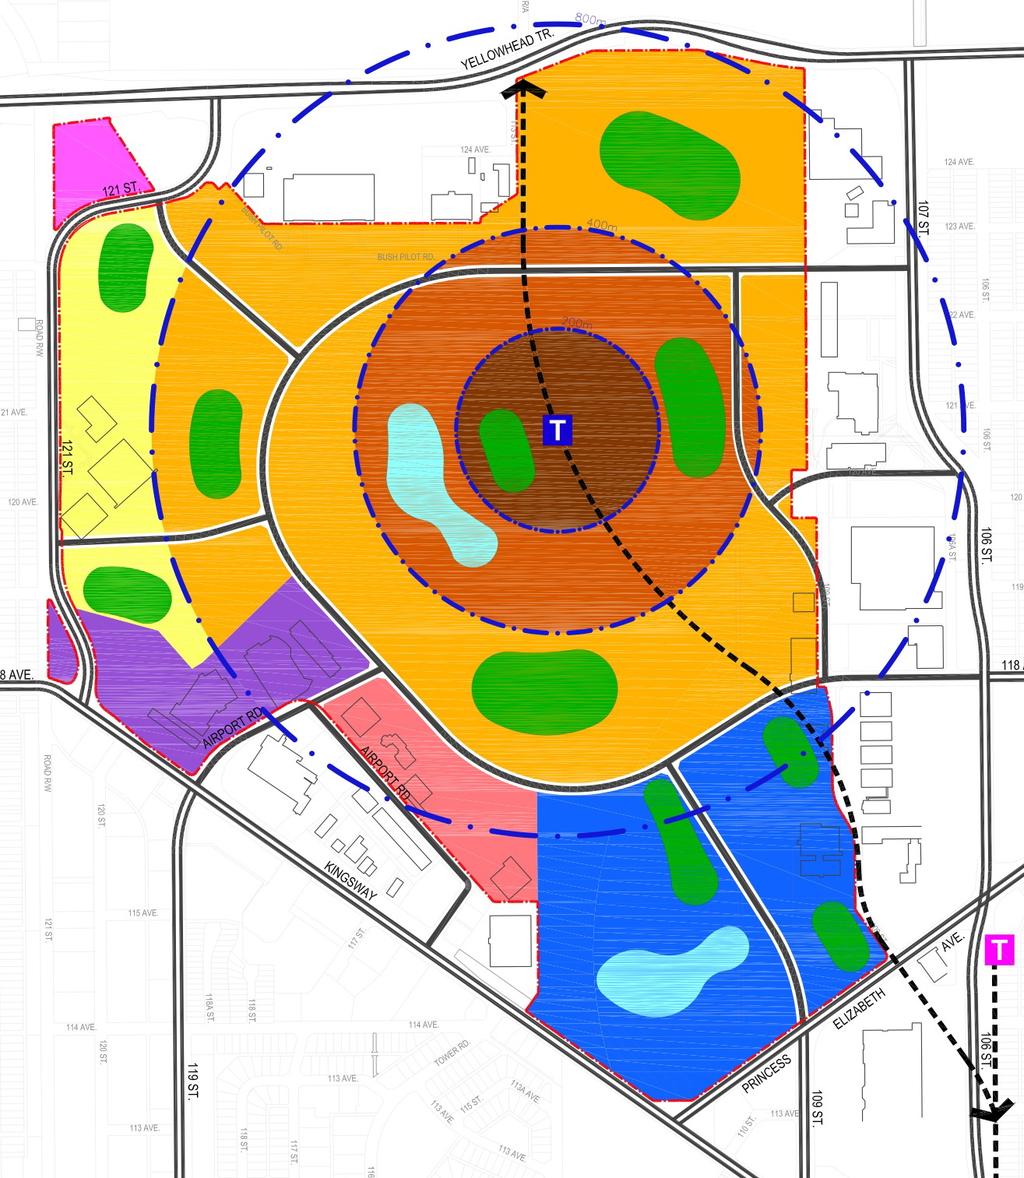 Demonstration Plan Study Area The ECCA Lands (Study Area) includes 217.1 hectares (536.5 acres) of land at the Edmonton City Centre Airport as defined by the areas highlighted in the figure.